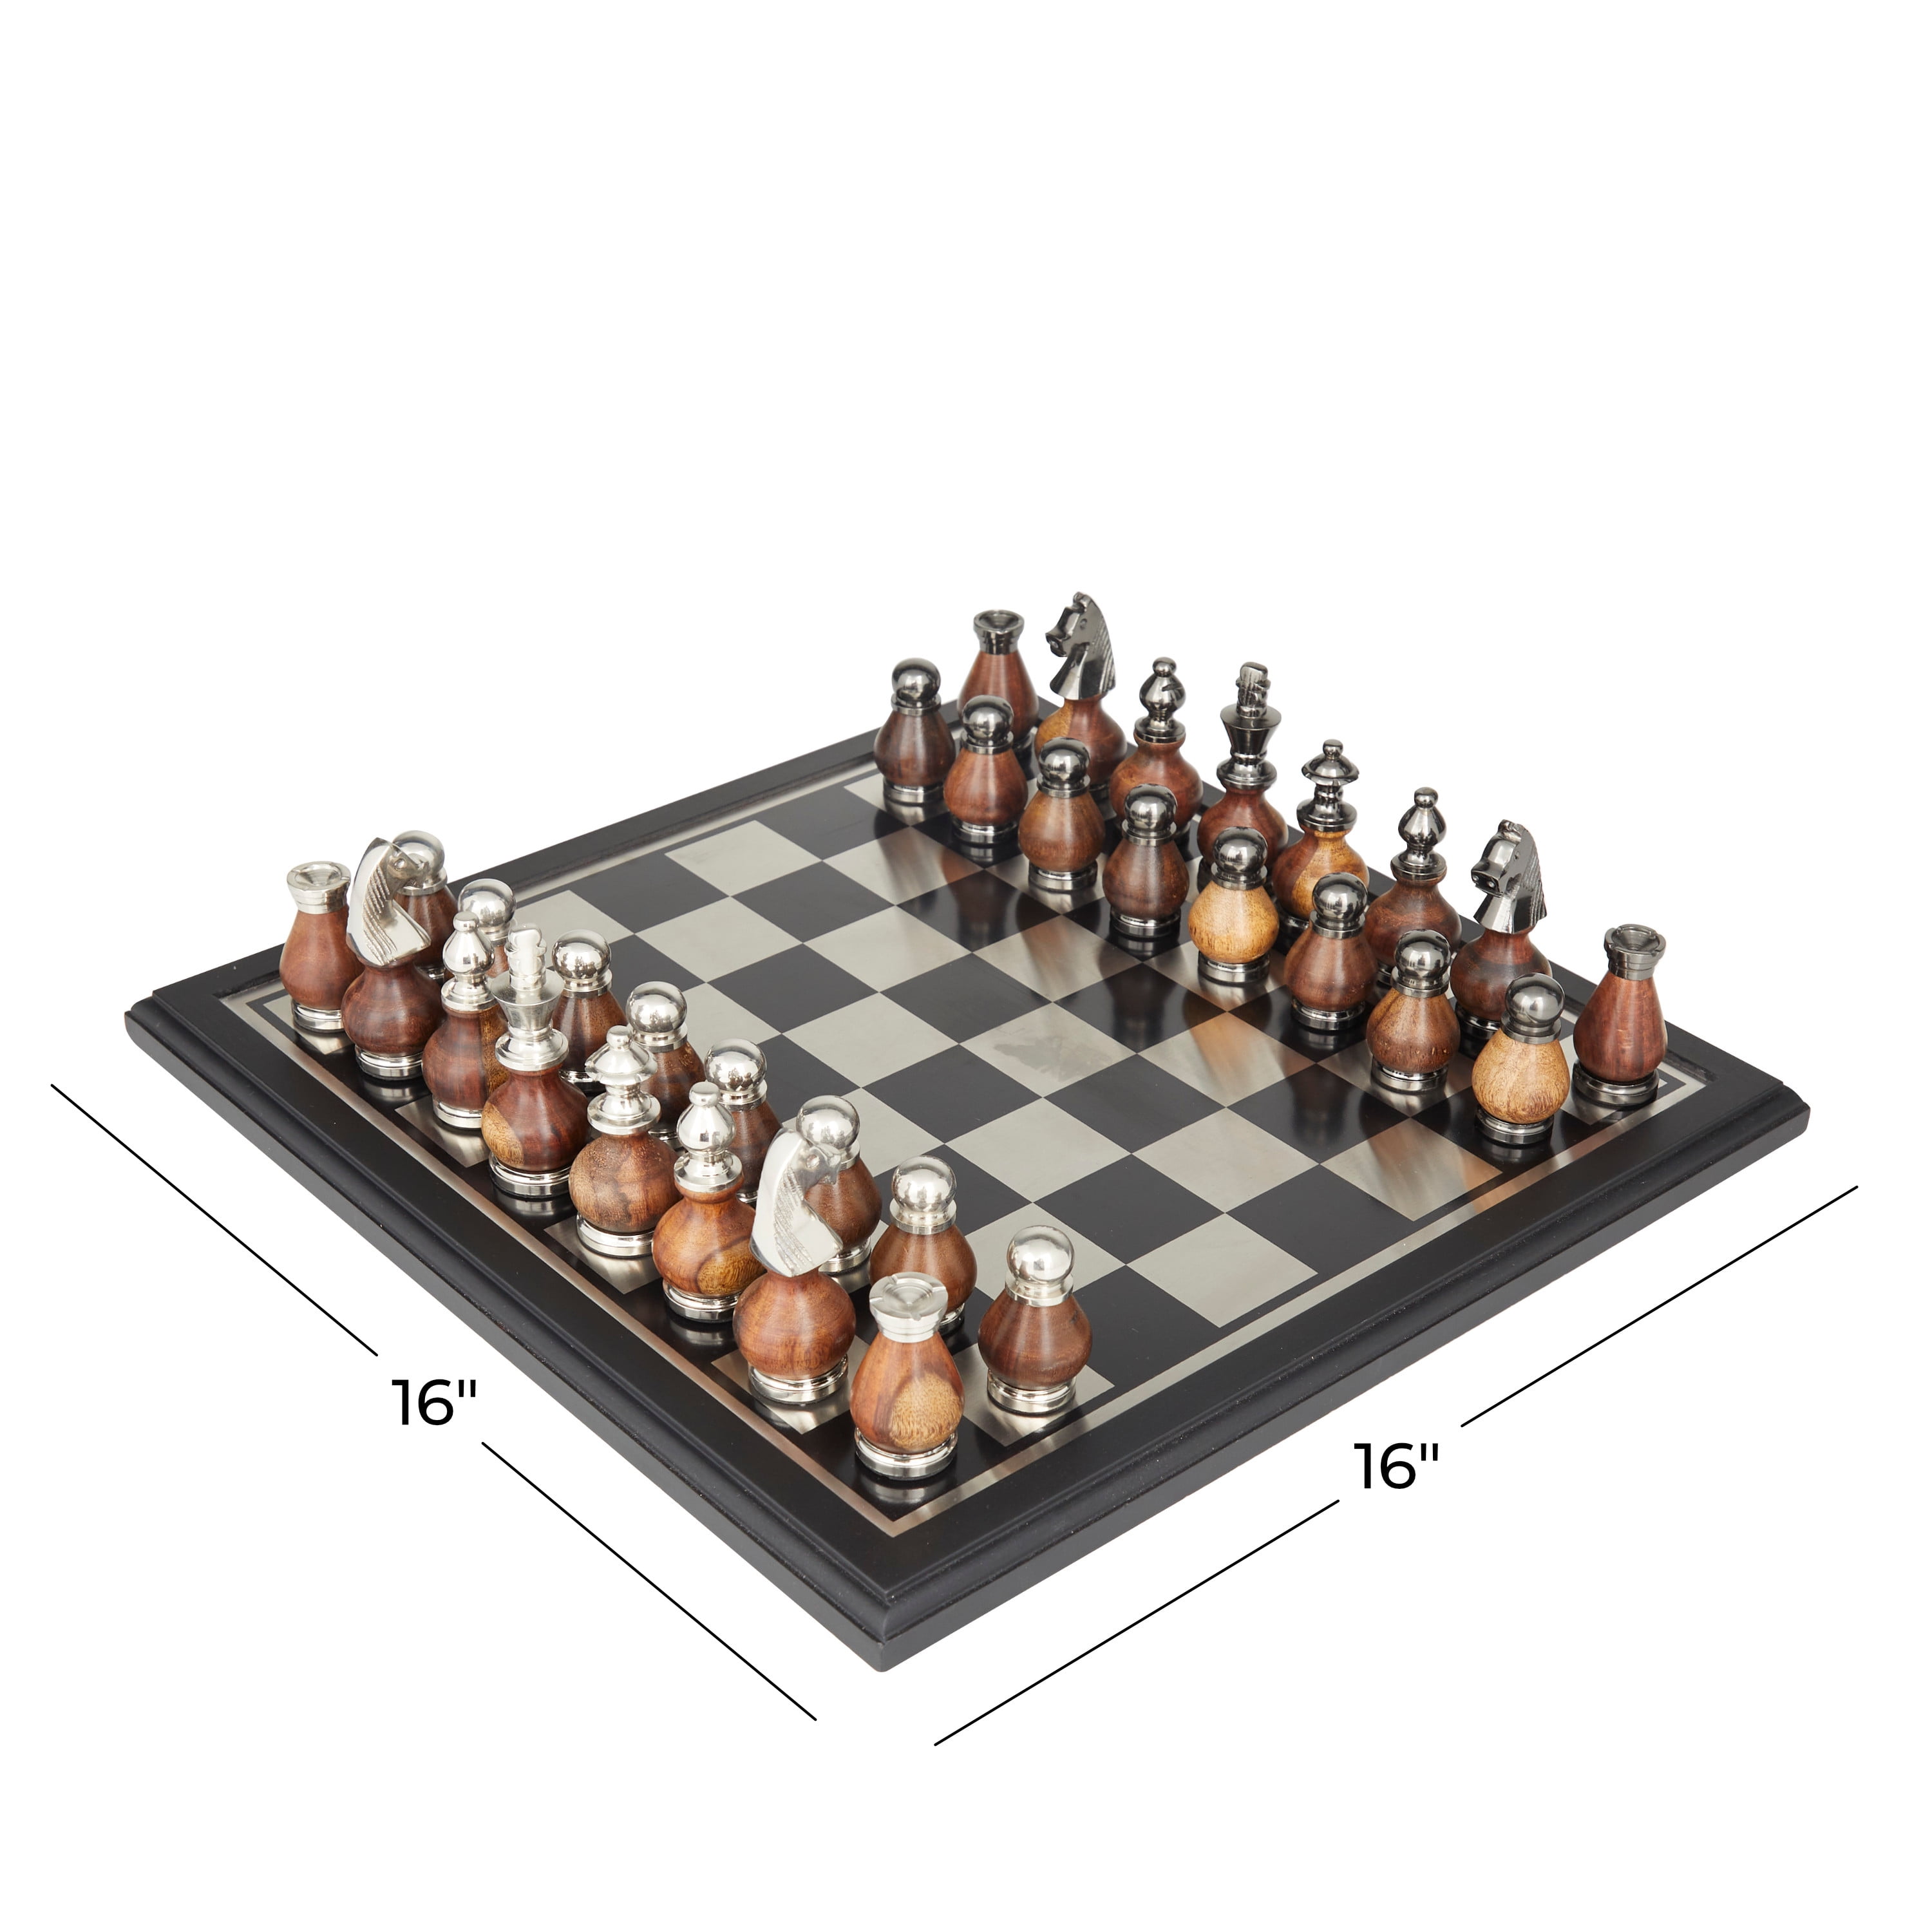 Metal Chess Set: Strategy With Recycled Car Parts